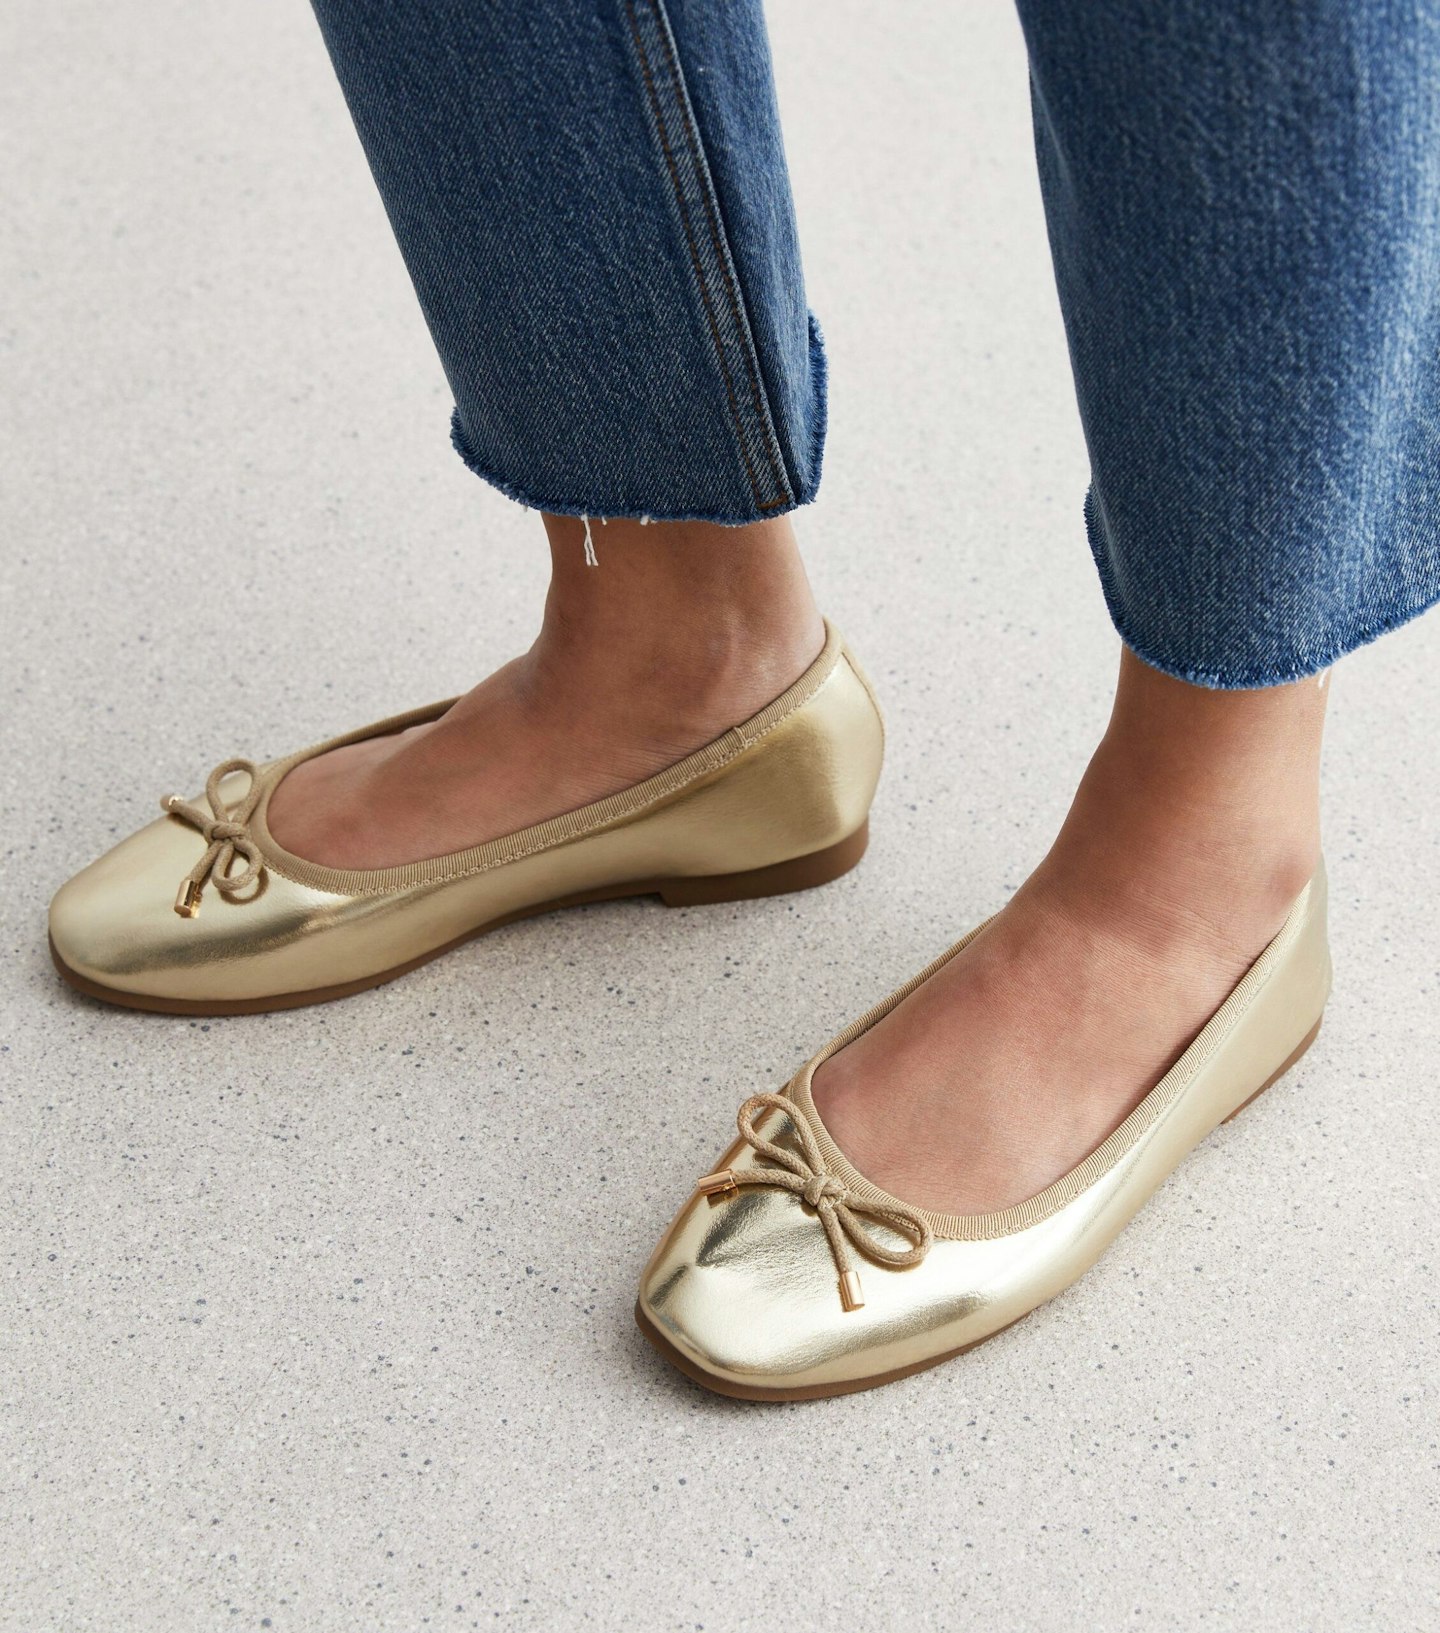 New Look Gold Leather-Look Bow Ballet Pumps